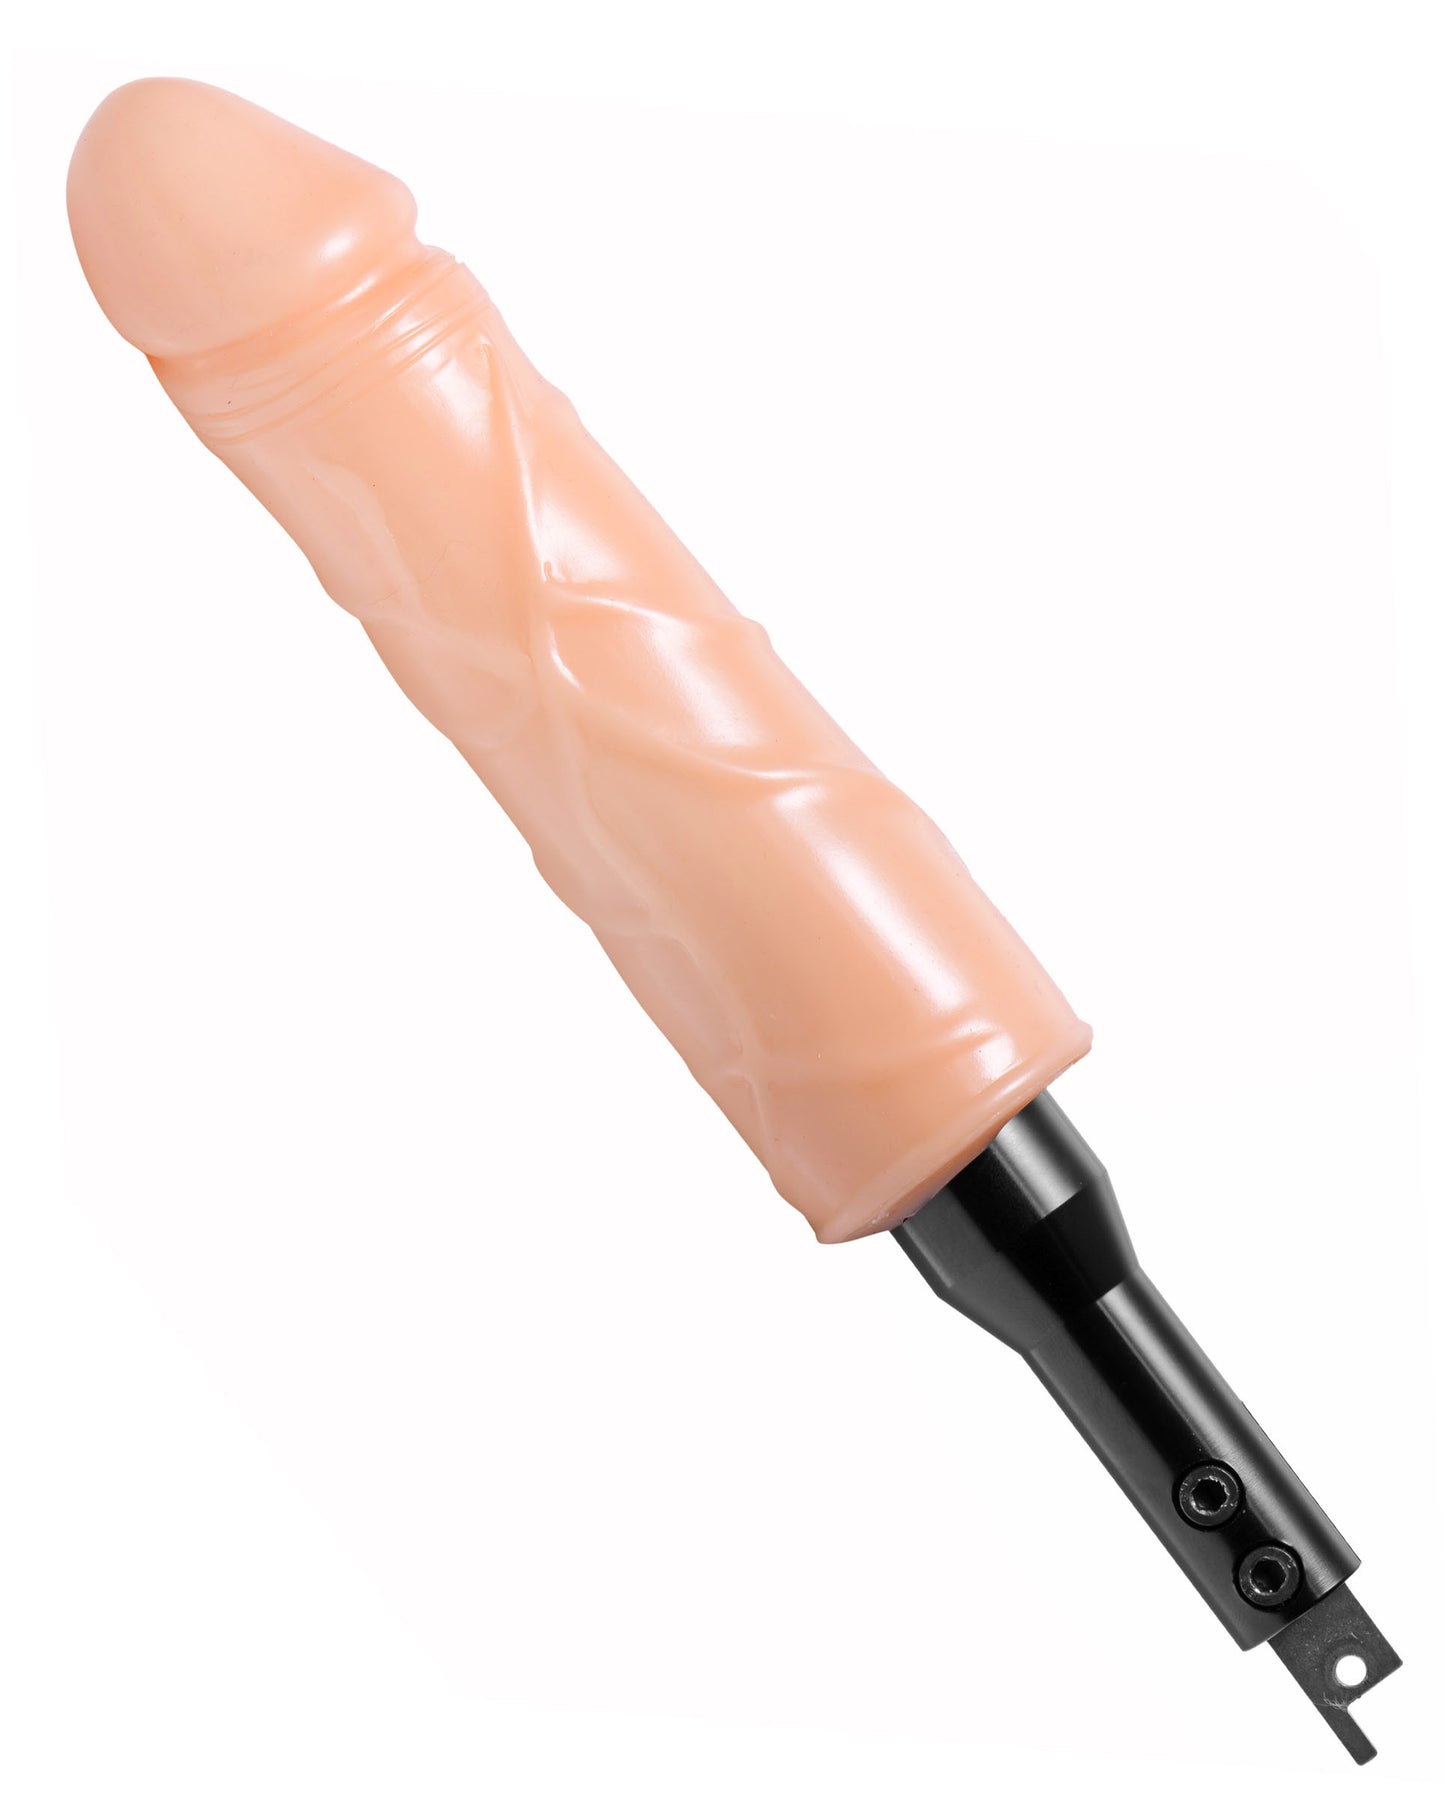 The Fucking Adapter Plus With Dildo  - Club X